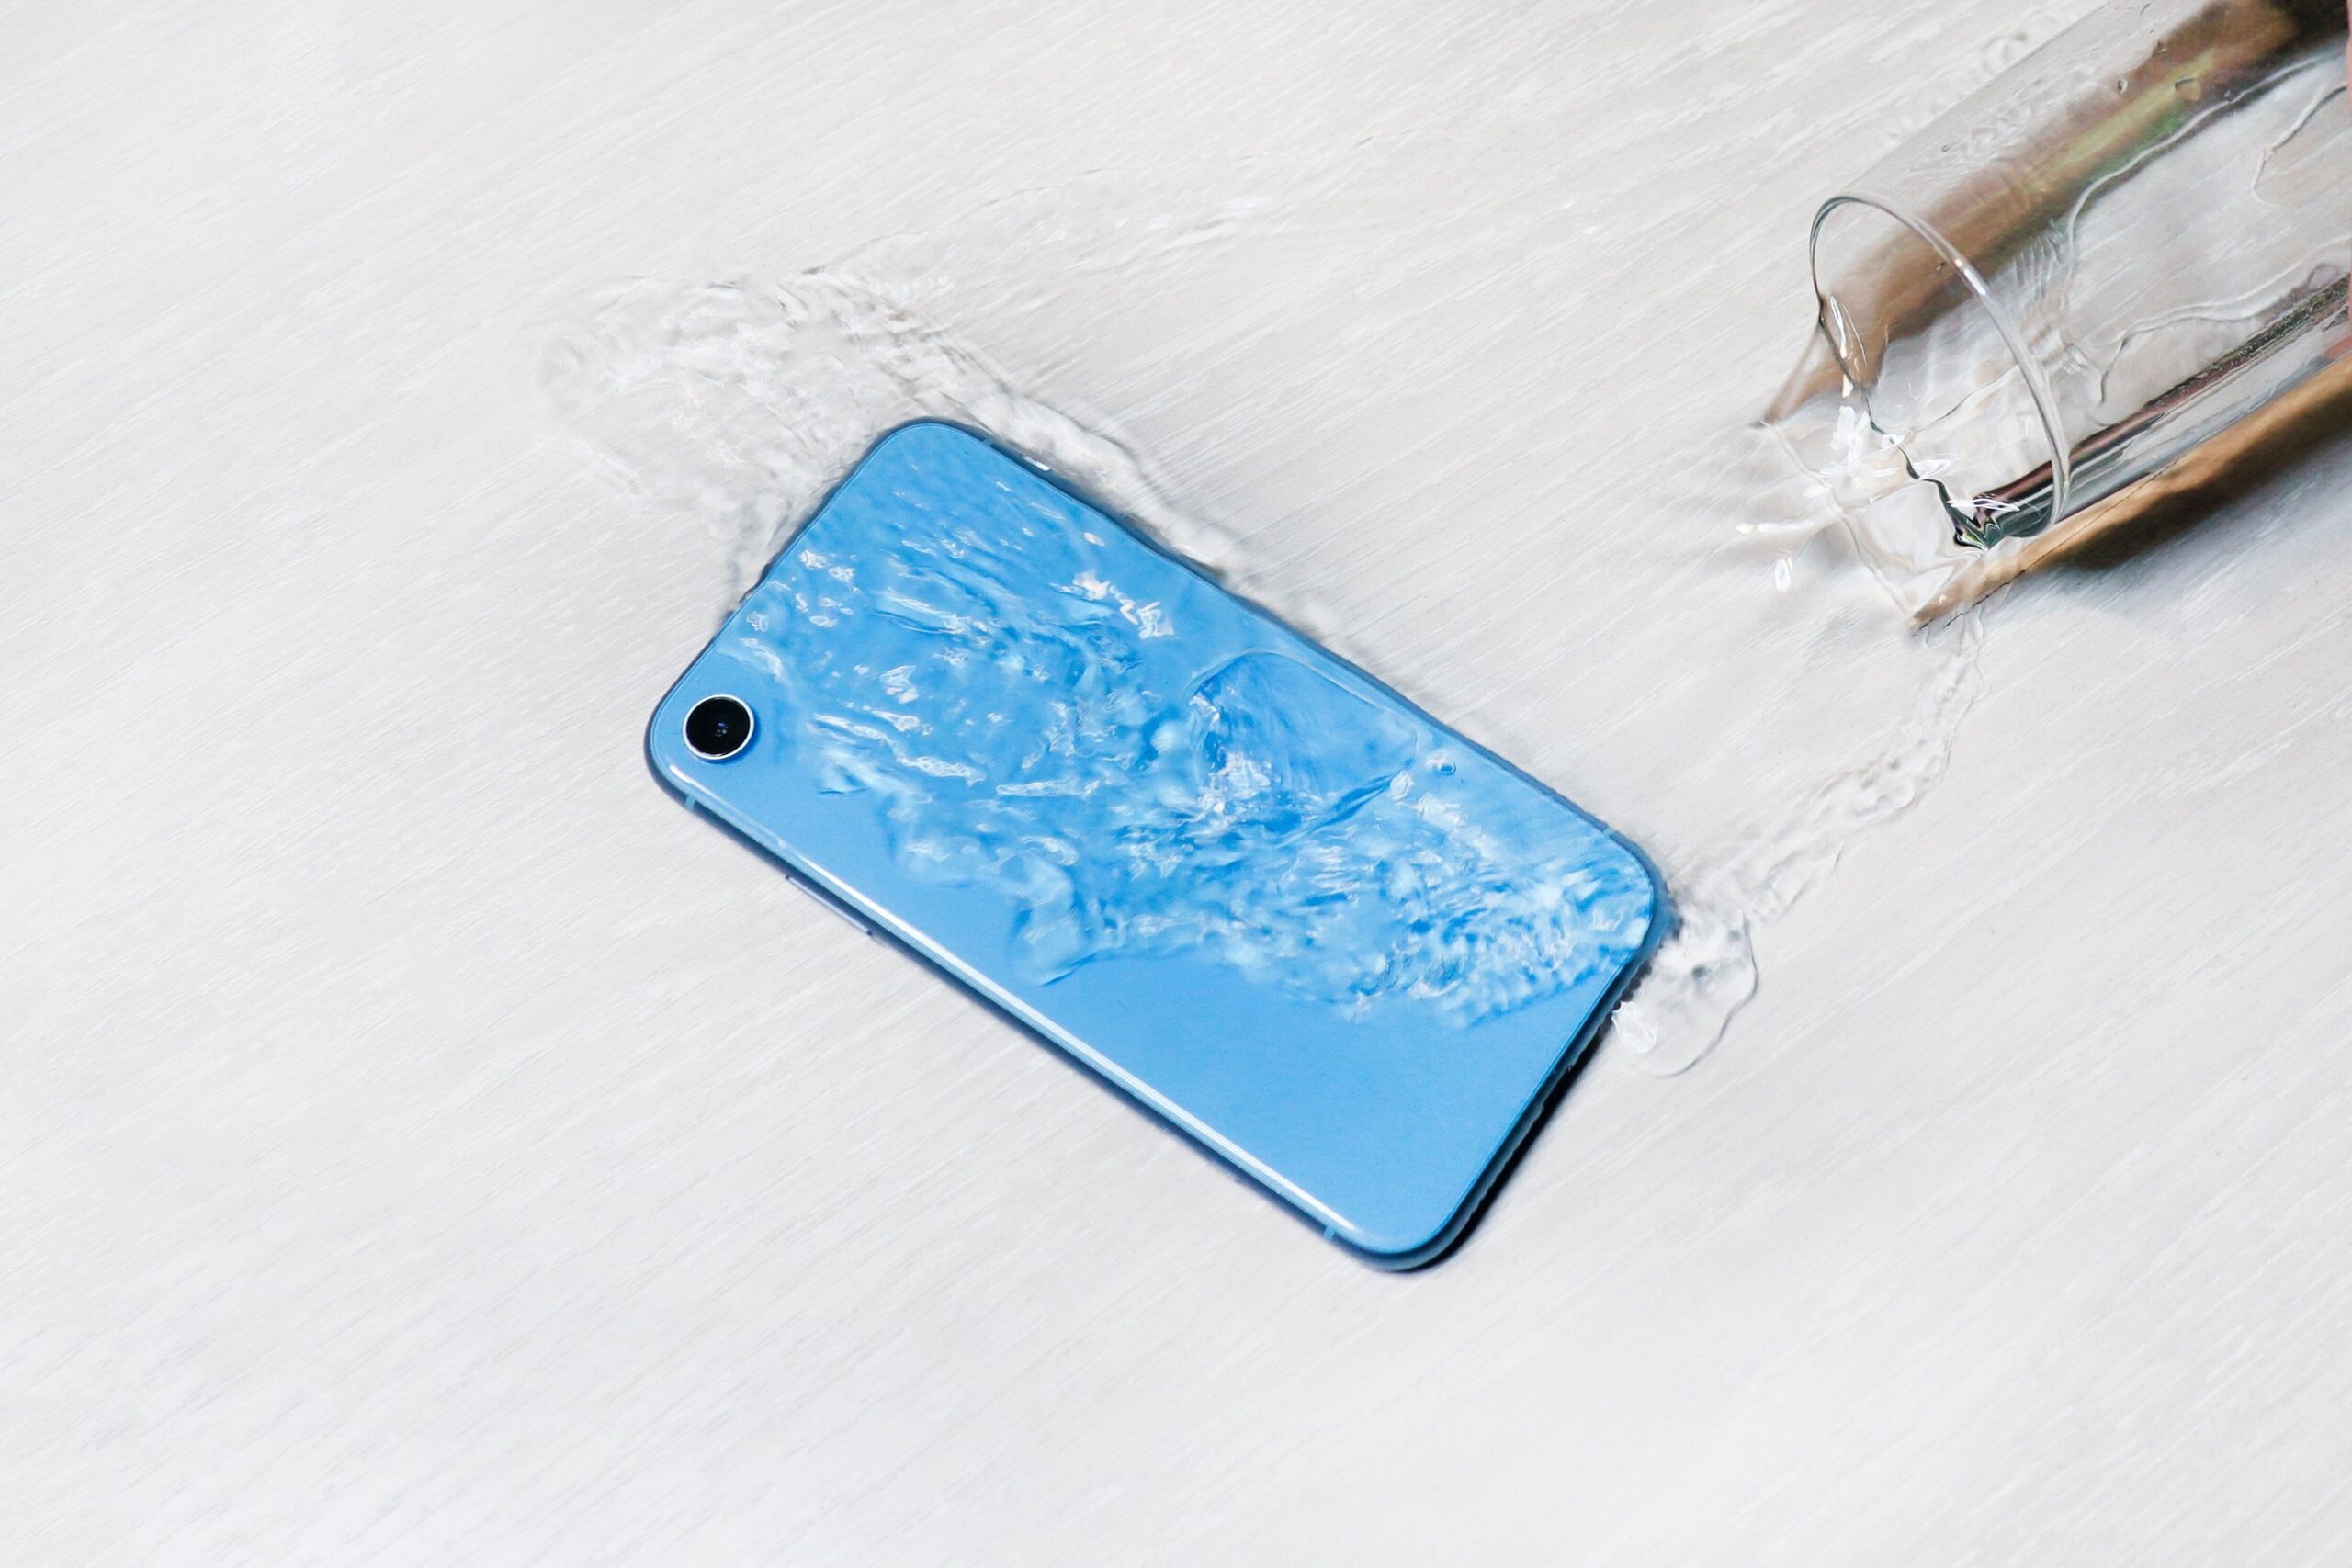 ﻿In this article How to save a wet smartphone. Contact Houston for more information